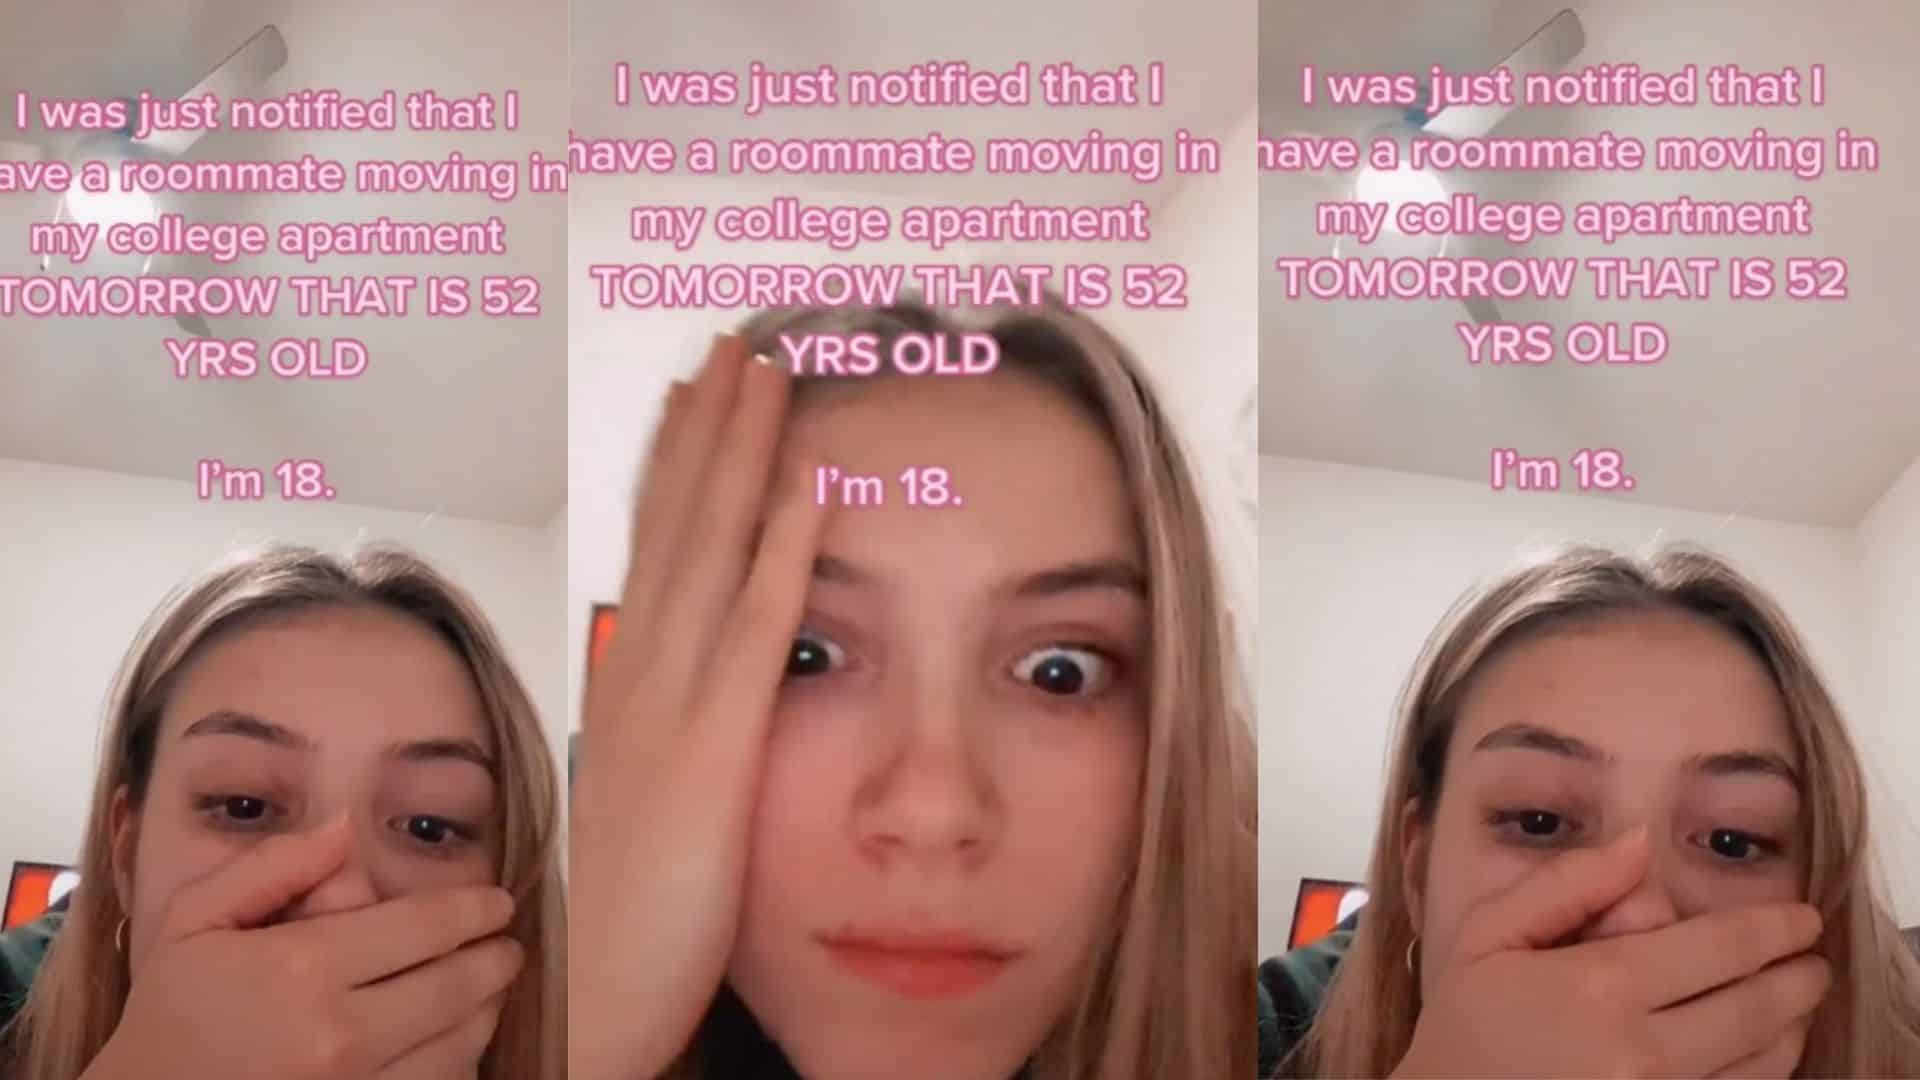 TikTok Creator Reveals She Was Assigned a 52YearOld Roommate as an 18